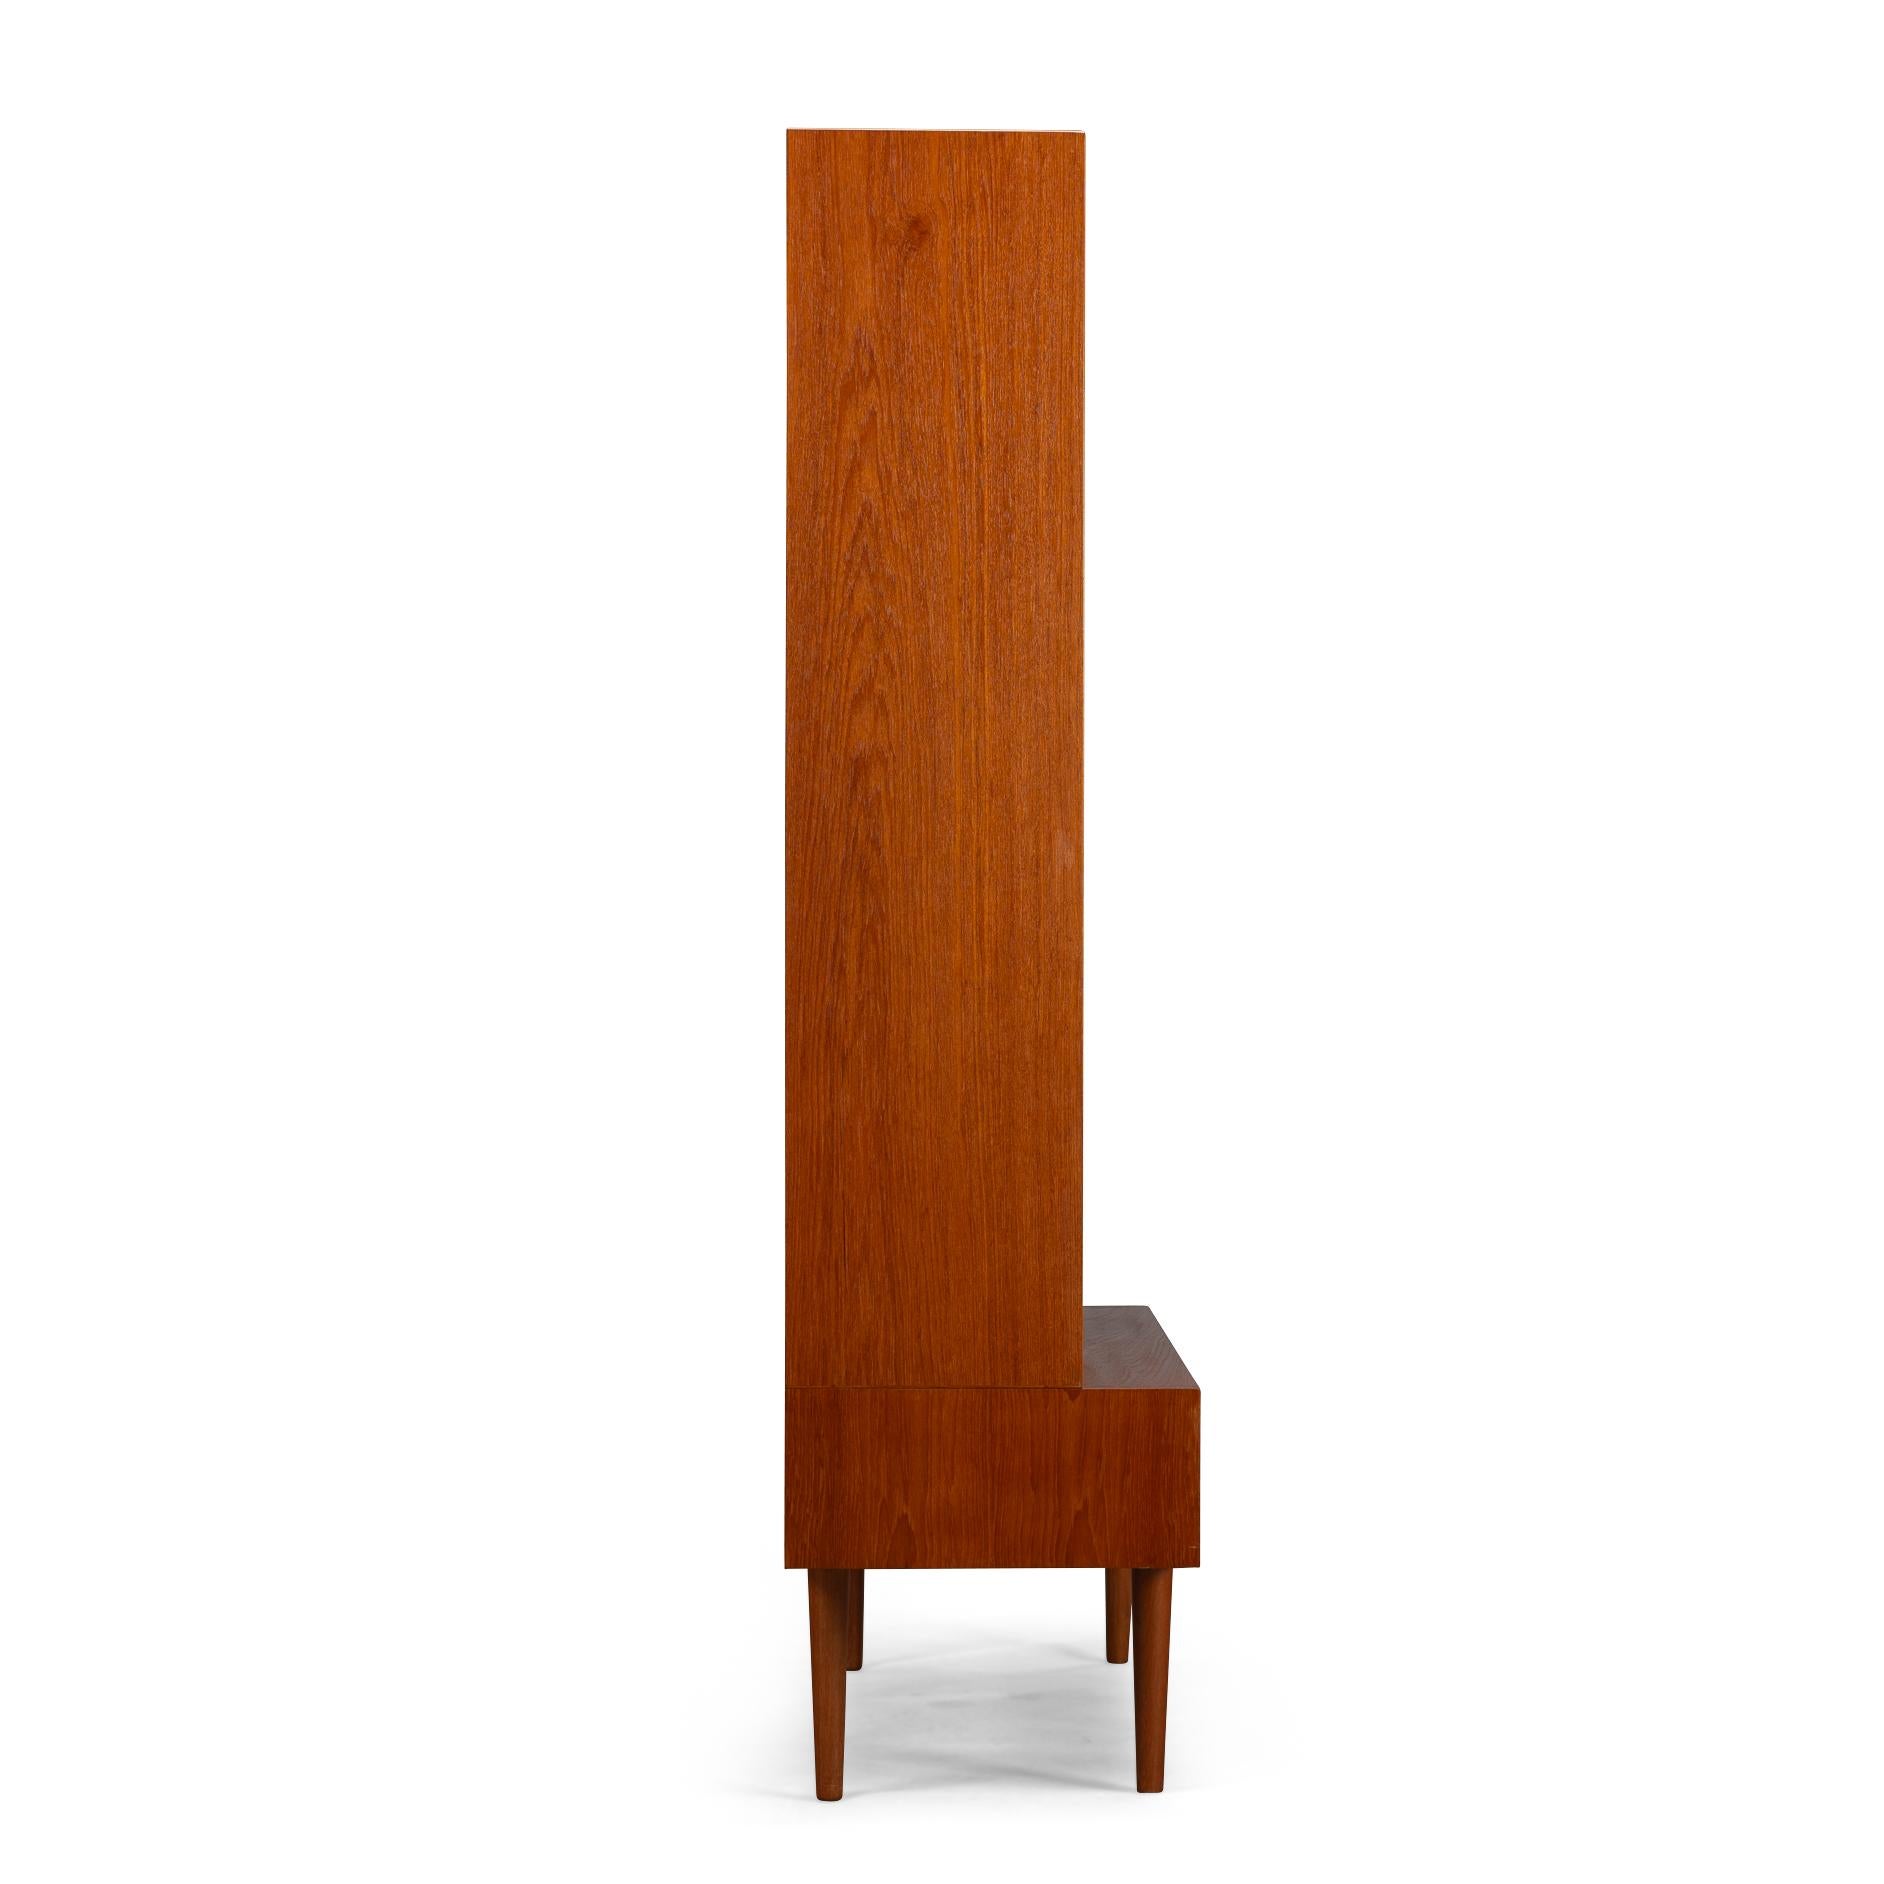 Danish Design
Introducing the Hundevad No. 26 bookcase with a seperate small sideboard underneath, a stunning example of midcentury modern Danish design. This unique piece combines a small low sideboard with a separate bookcase on top, creating a